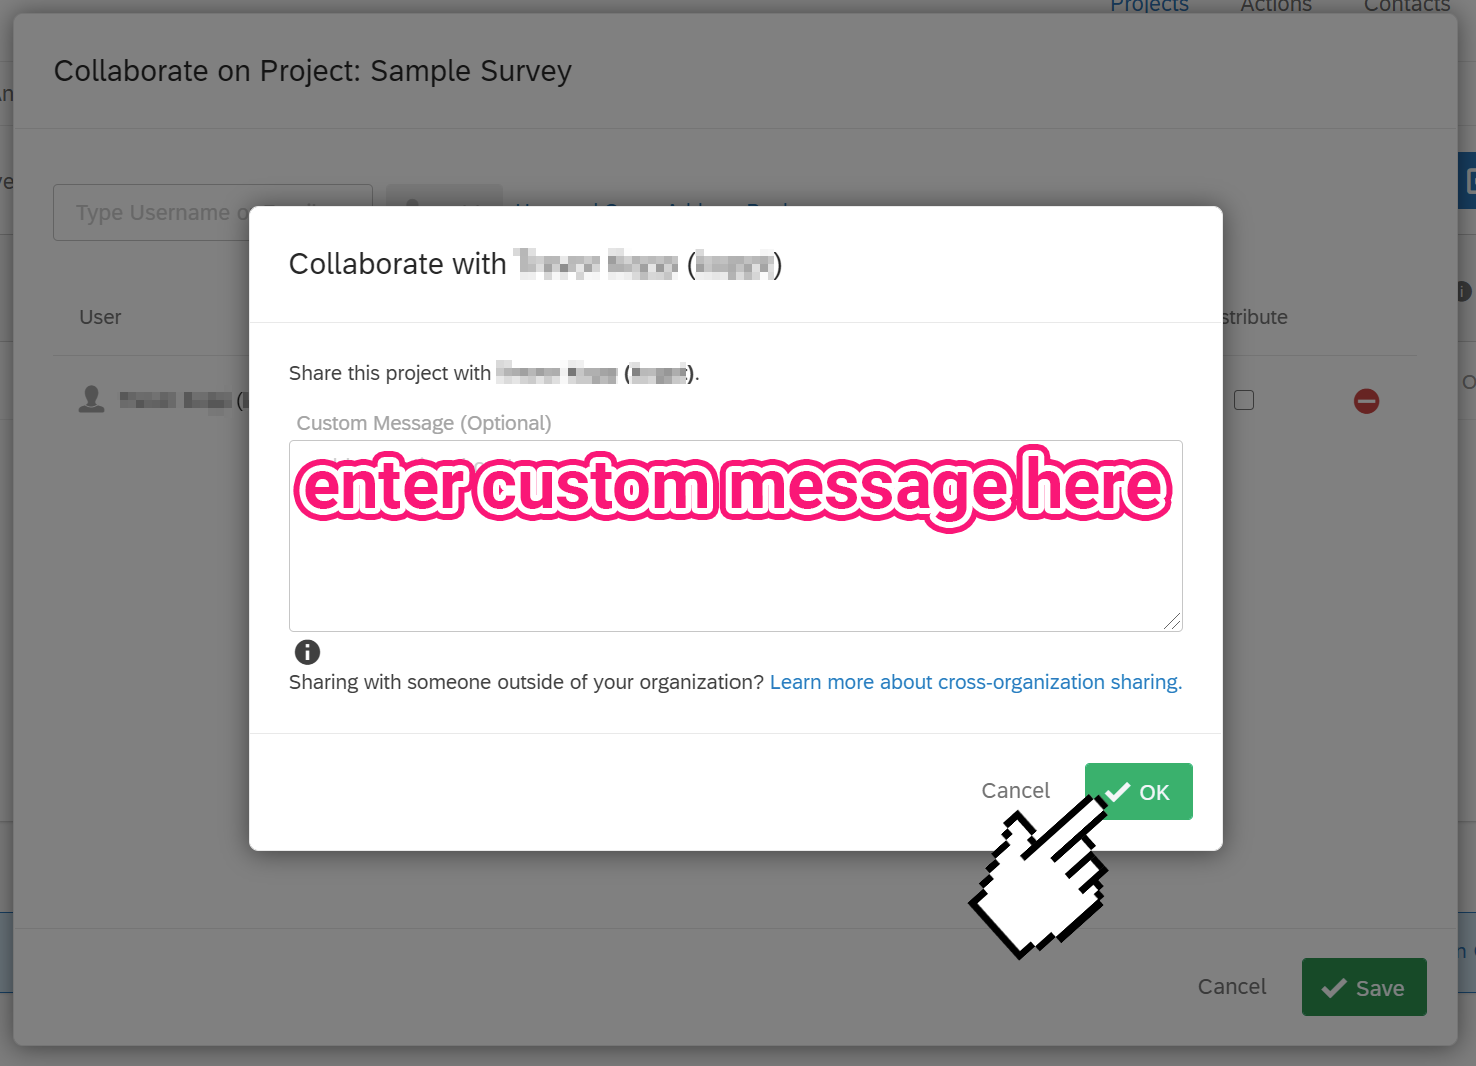 A screenshot of the collaborate invitation screen, showing the custom message dialog box and the Save button.